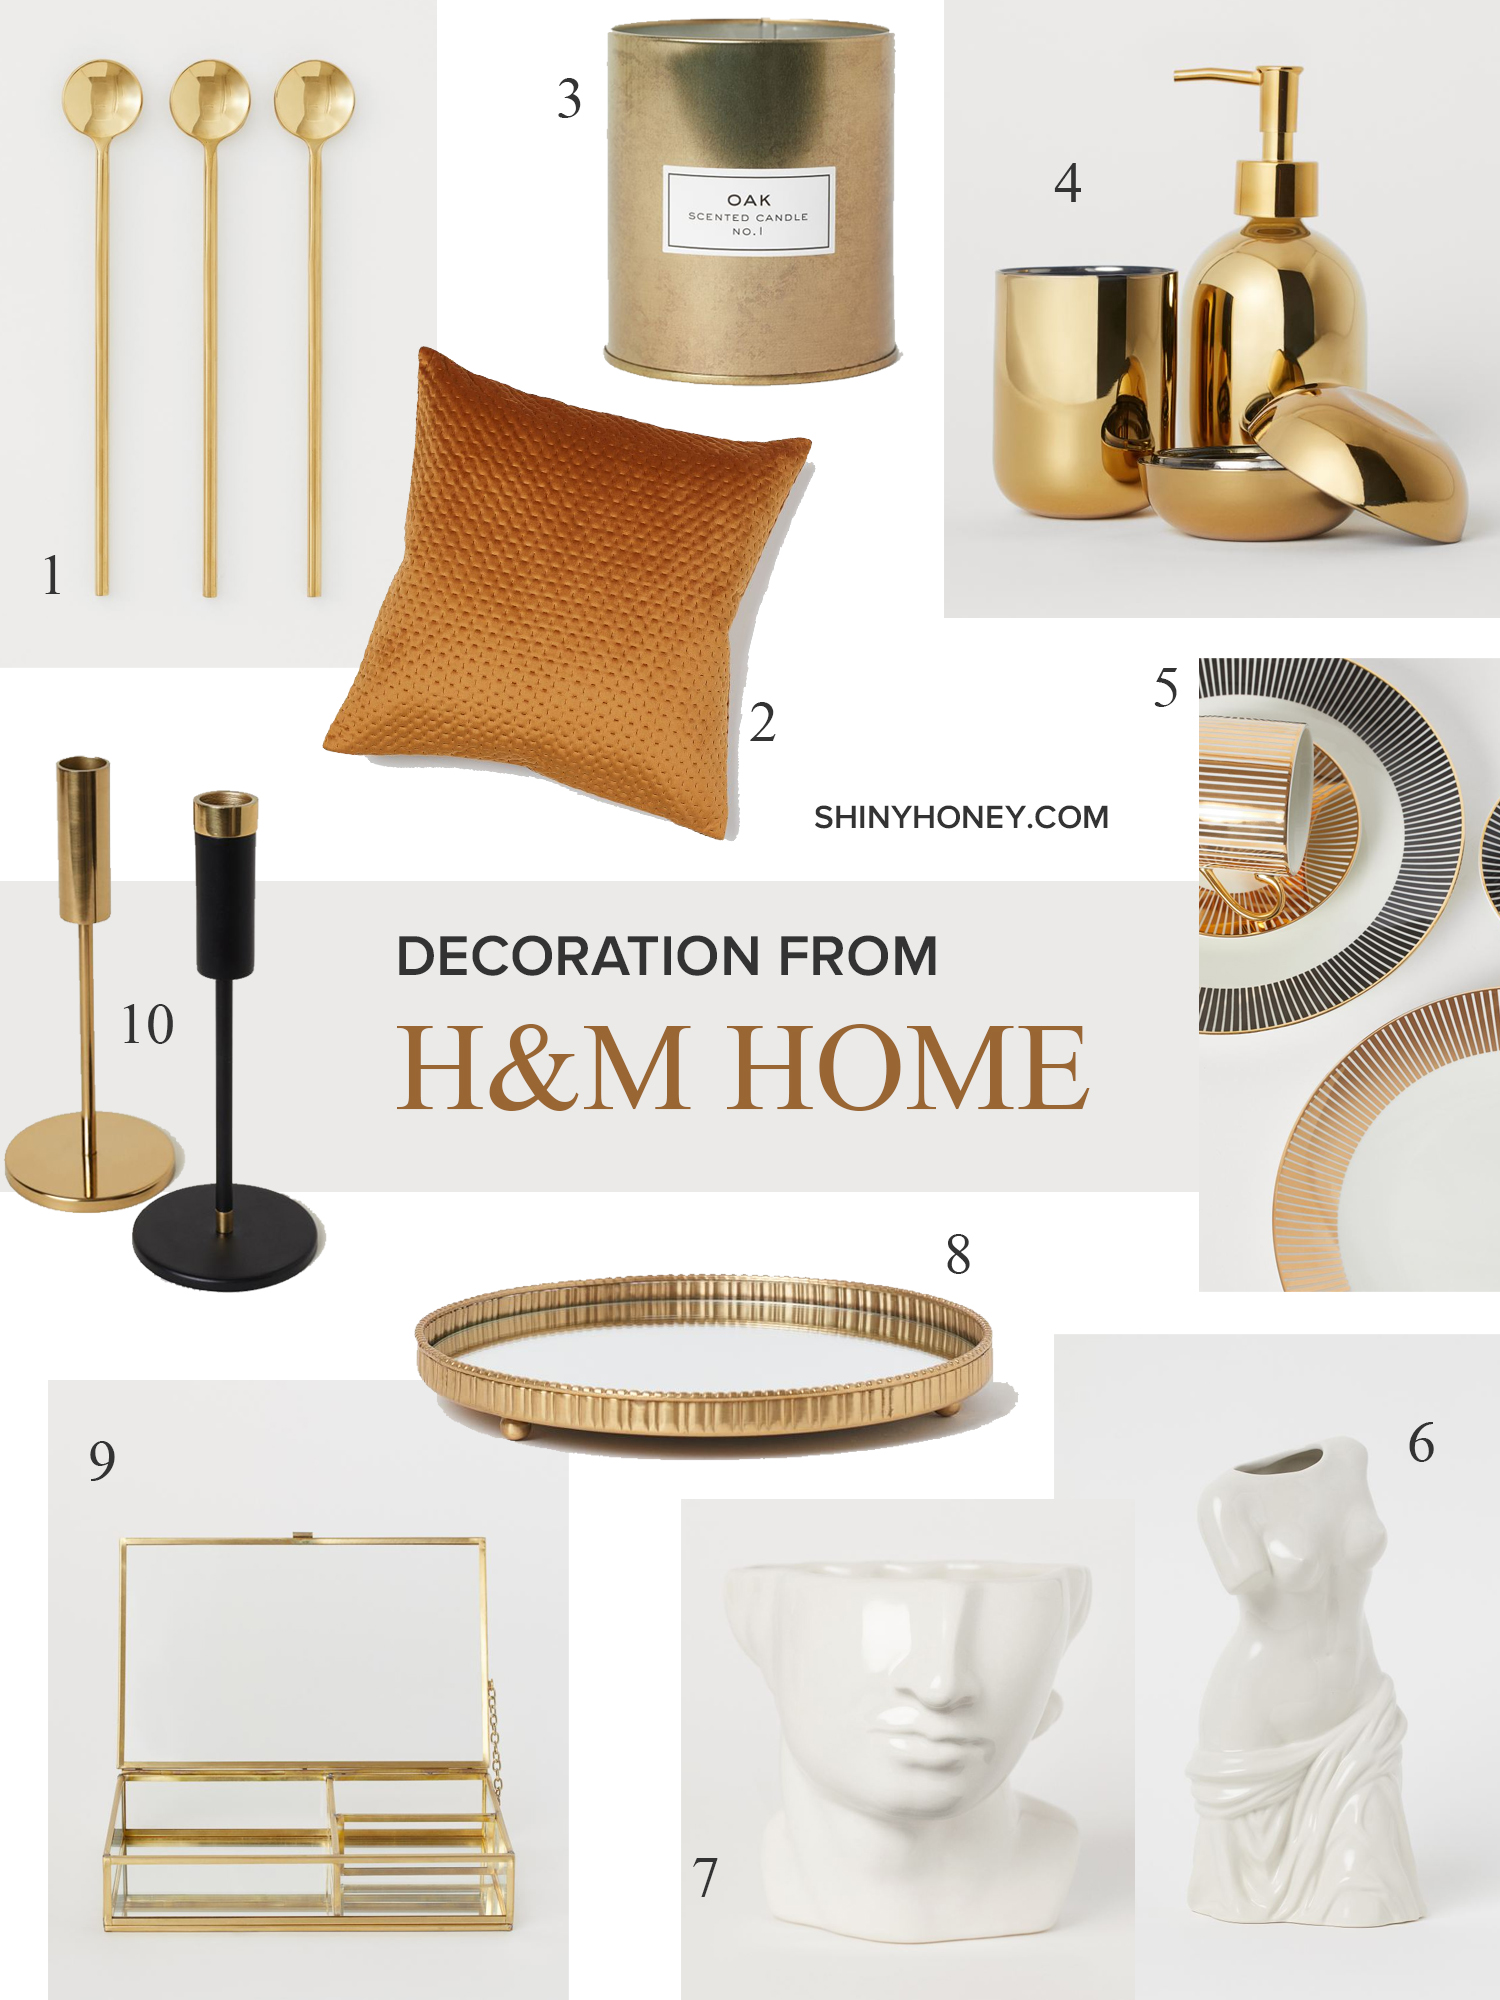 Decoration from H&M Home by Tamara Bellis